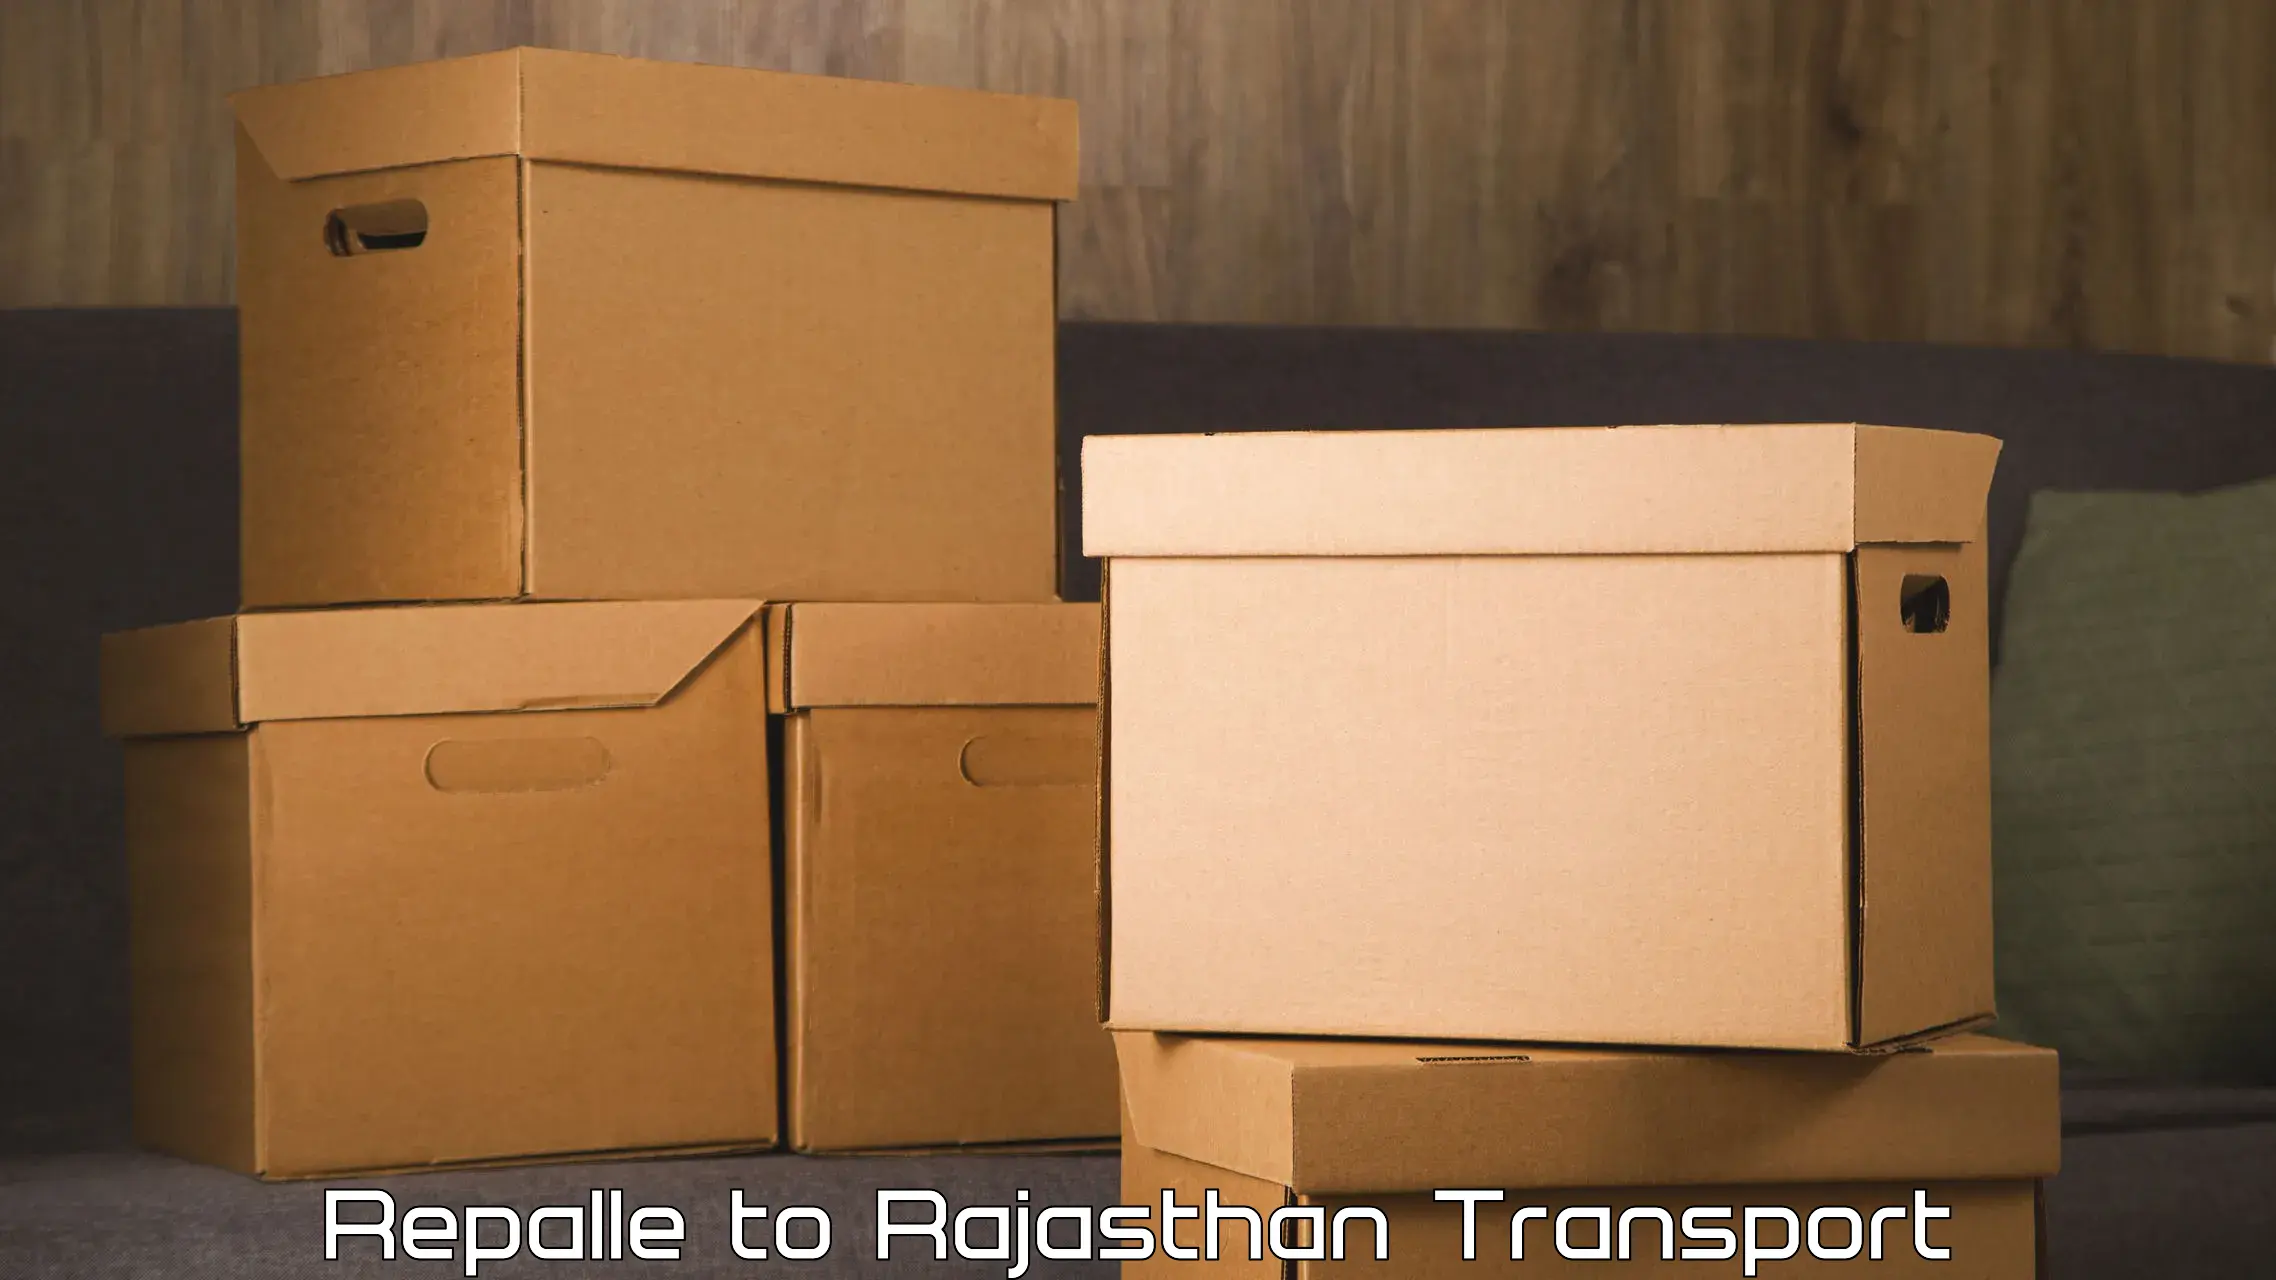 Bike transport service Repalle to Rajasthan